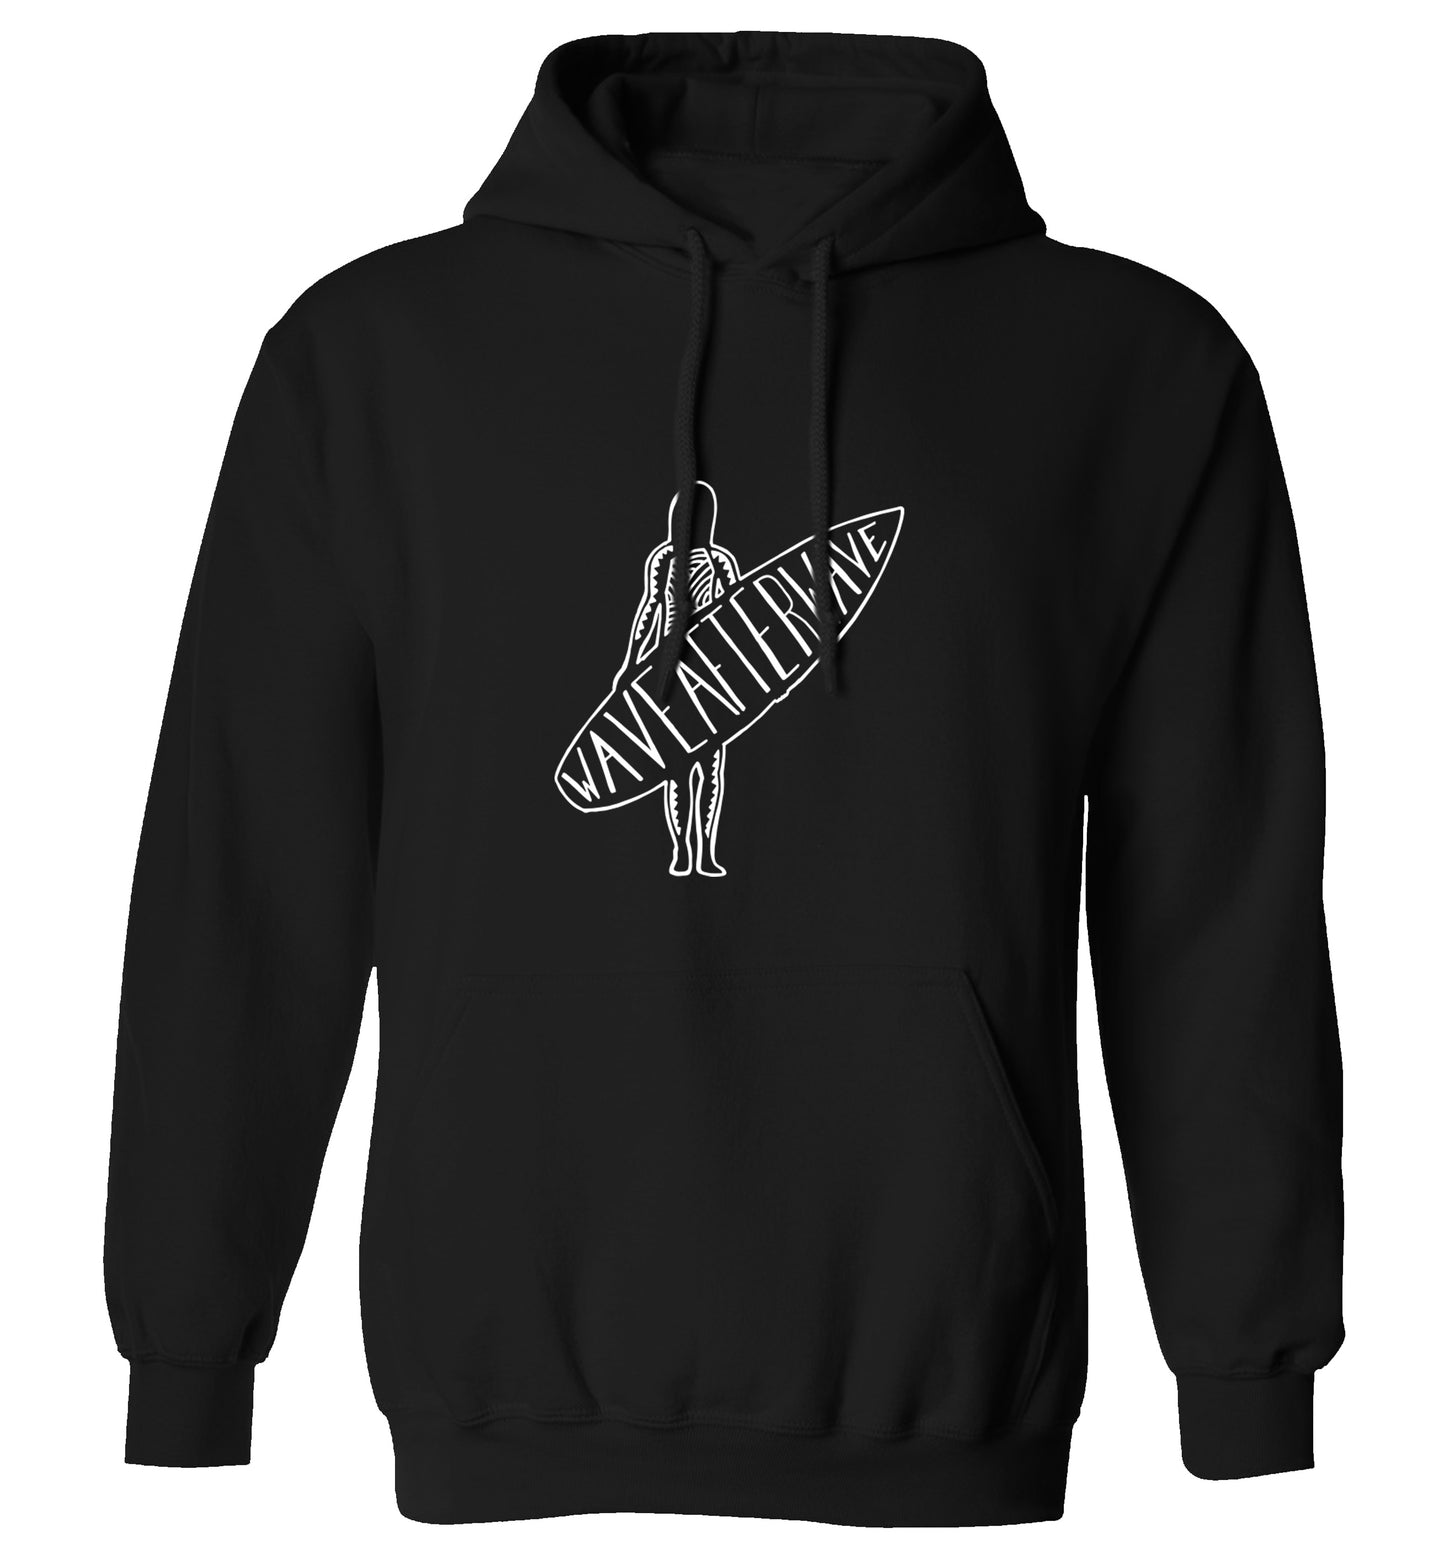 Wave after wave adults unisex black hoodie 2XL